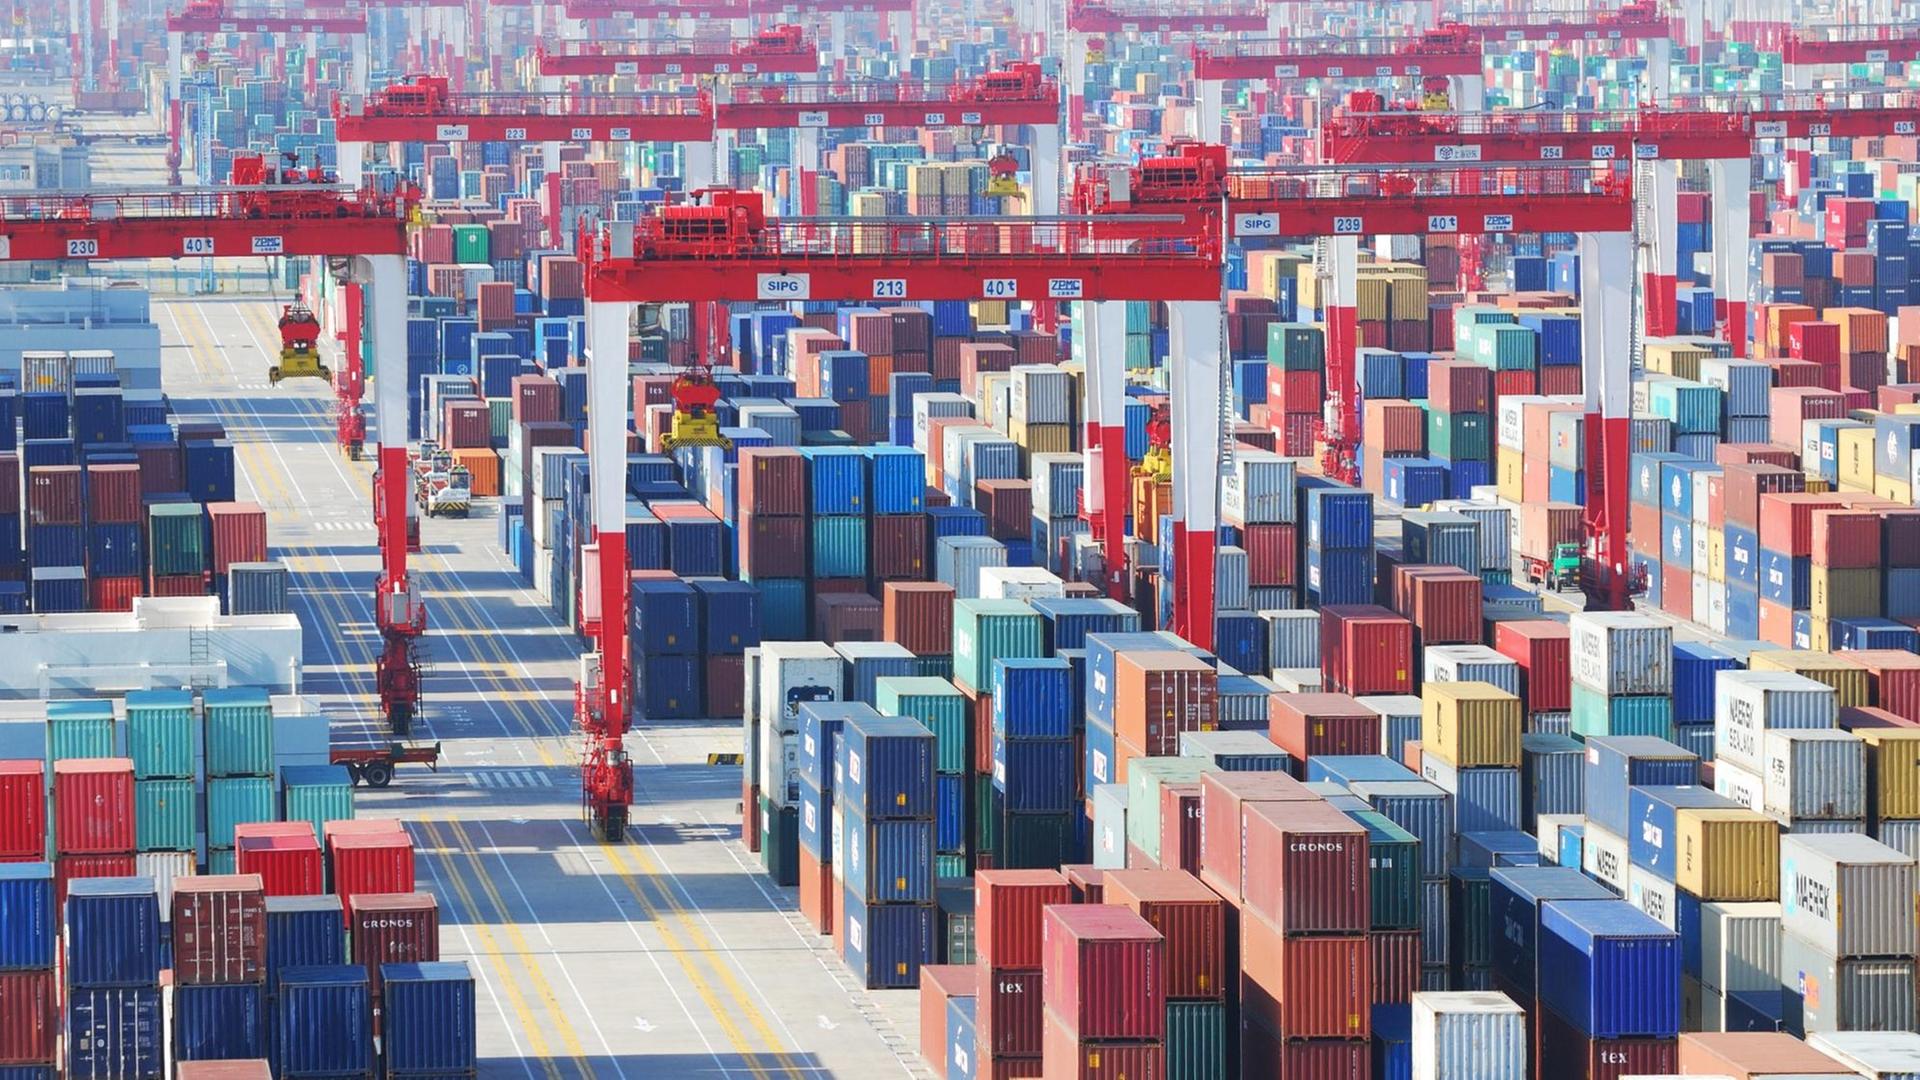 Containers are seen at the Yangsan Deepwater Port of Shanghai International Shipping Center in Shanghai, China, 4 December 2010. |